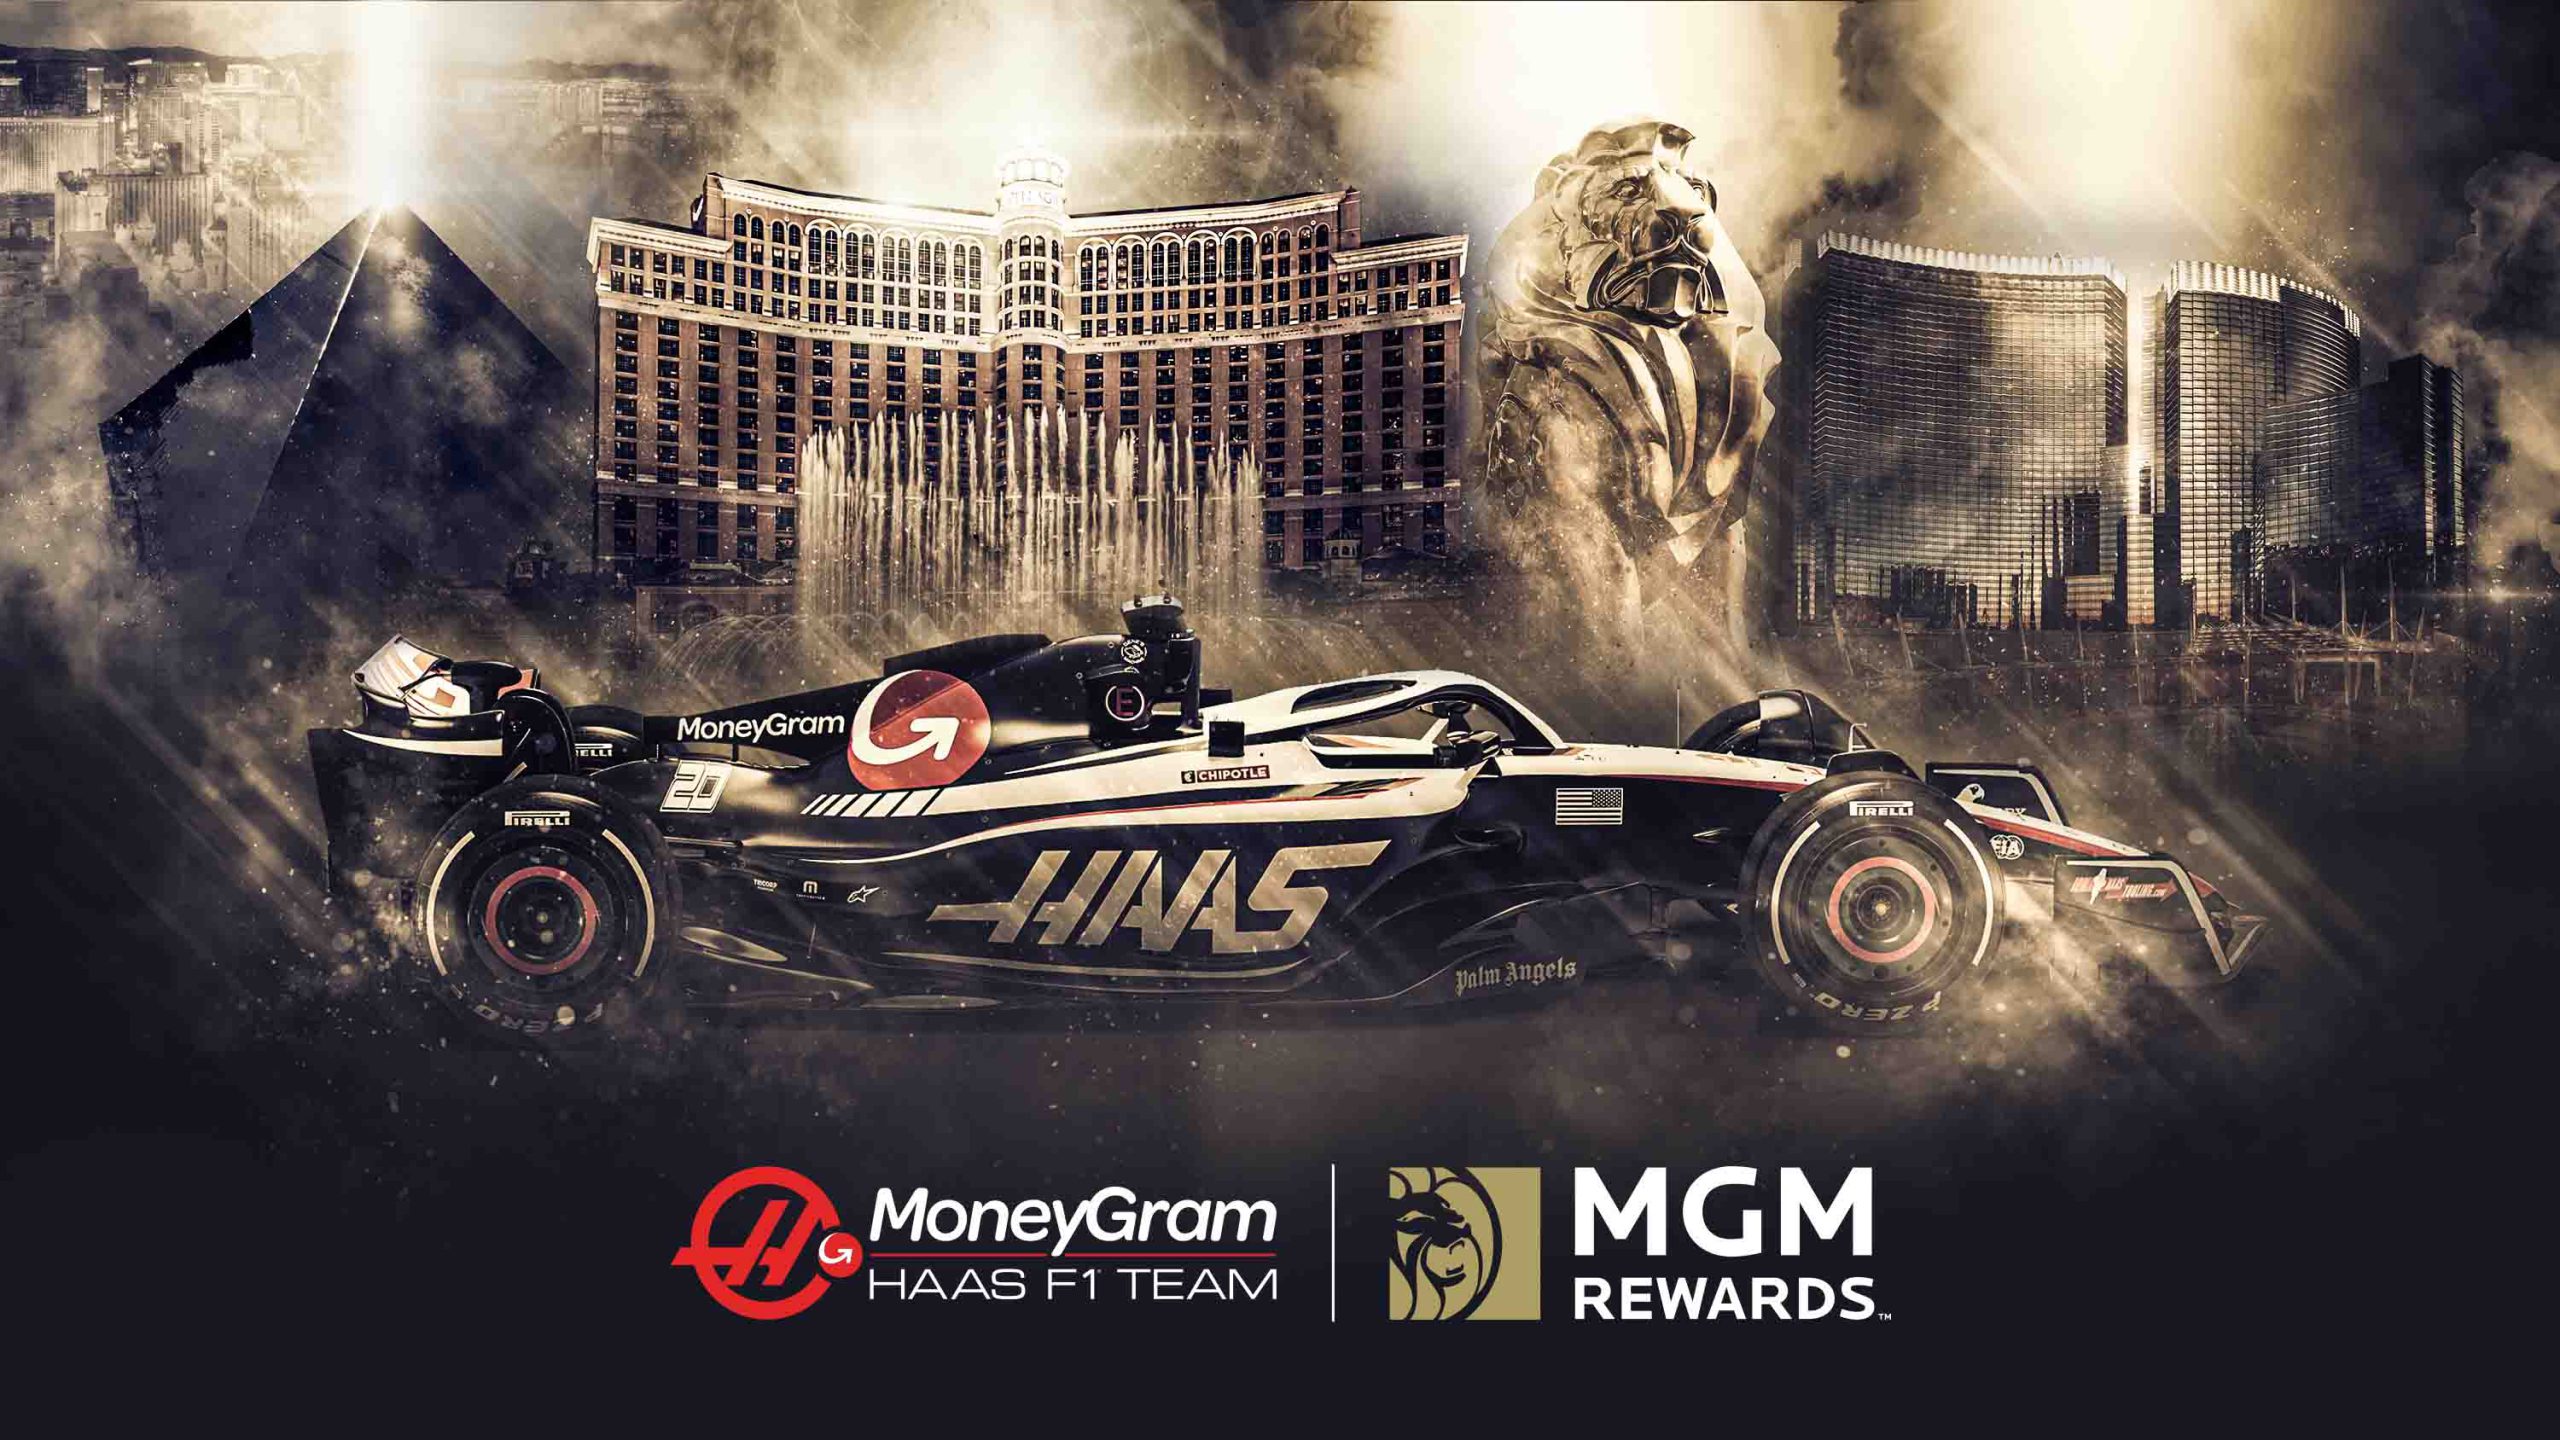 Does mgm resorts have a cryptocurrency coin cryptocurrency eos